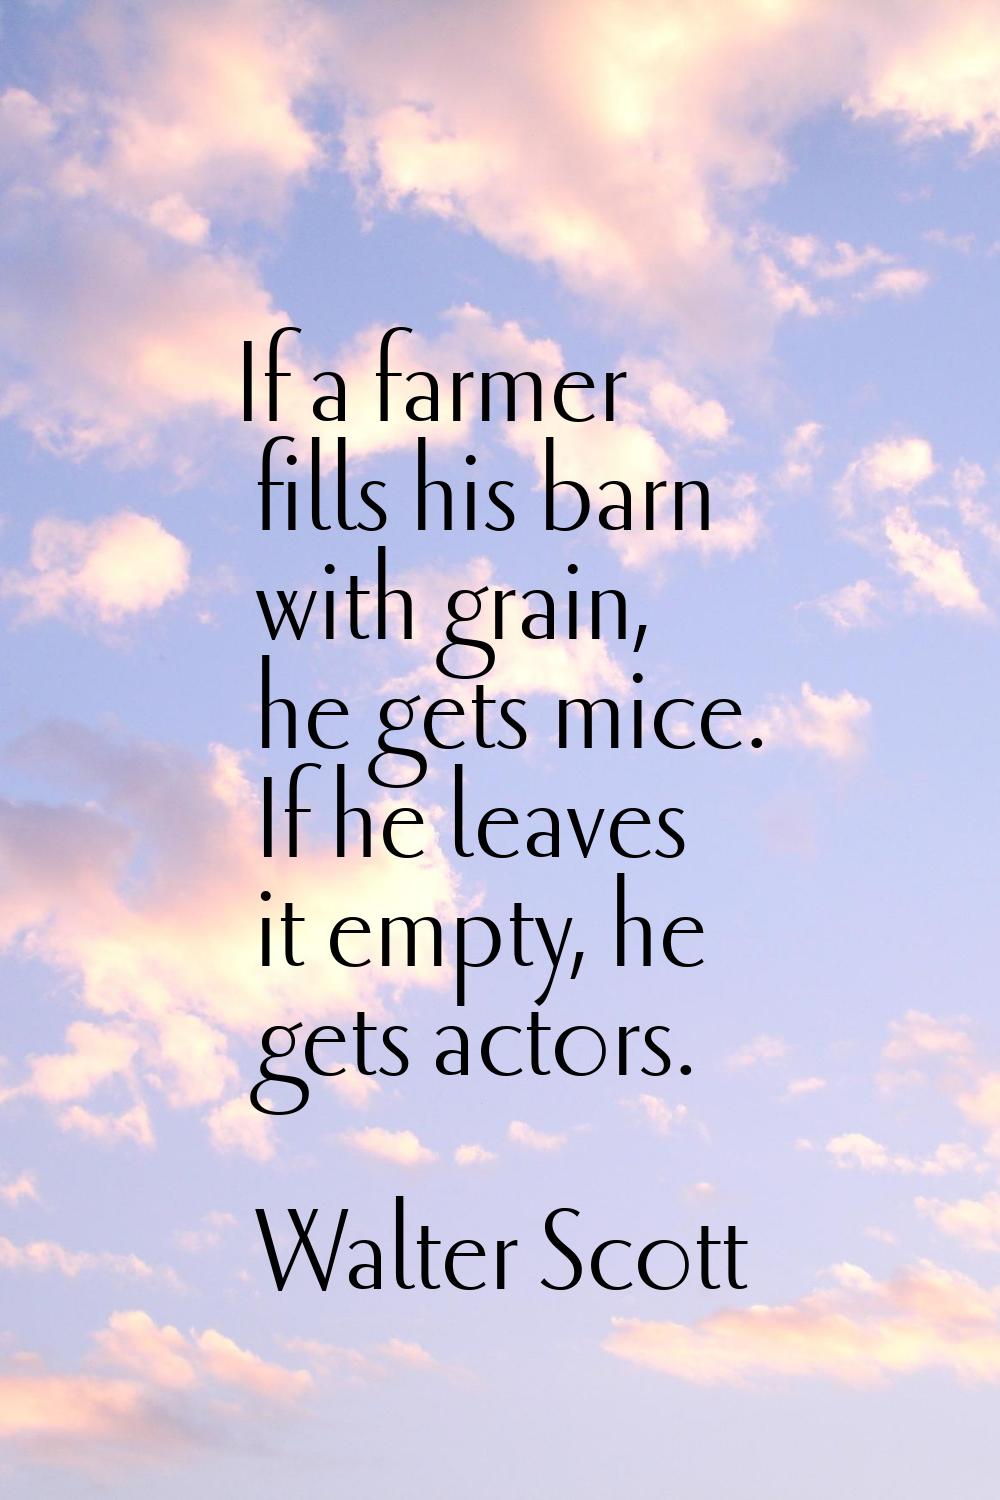 If a farmer fills his barn with grain, he gets mice. If he leaves it empty, he gets actors.